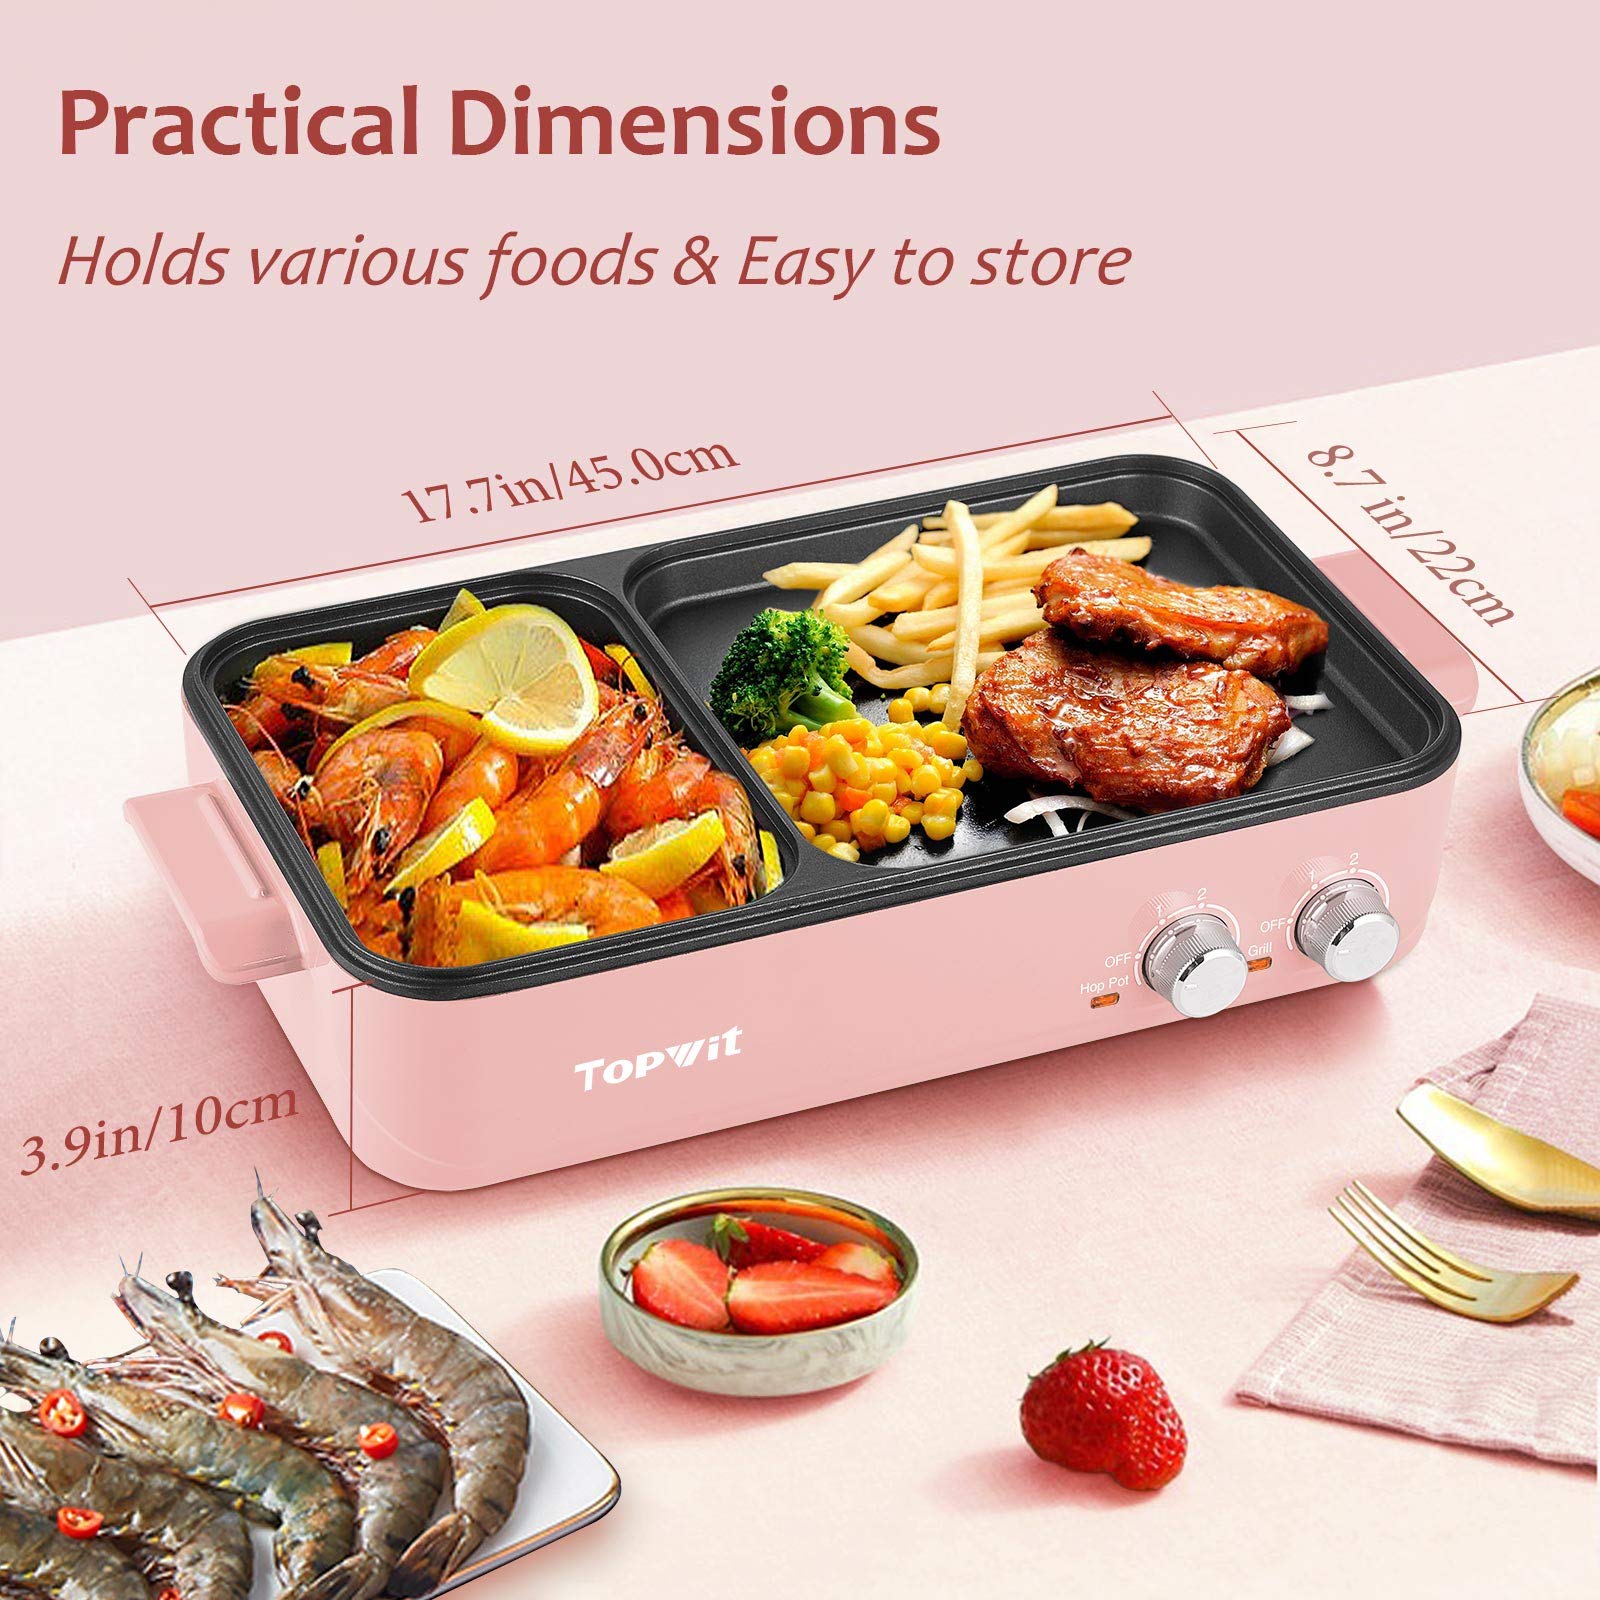 Topwit Hot Pot Electric with Grill, 2 in 1 Indoor Non-stick Hot Pot with Grill for Steaks, Shabu Shabu, Noodles, Simmer and Fry, Korean BBQ Grill, Independent Dual Temperature Control, Pink